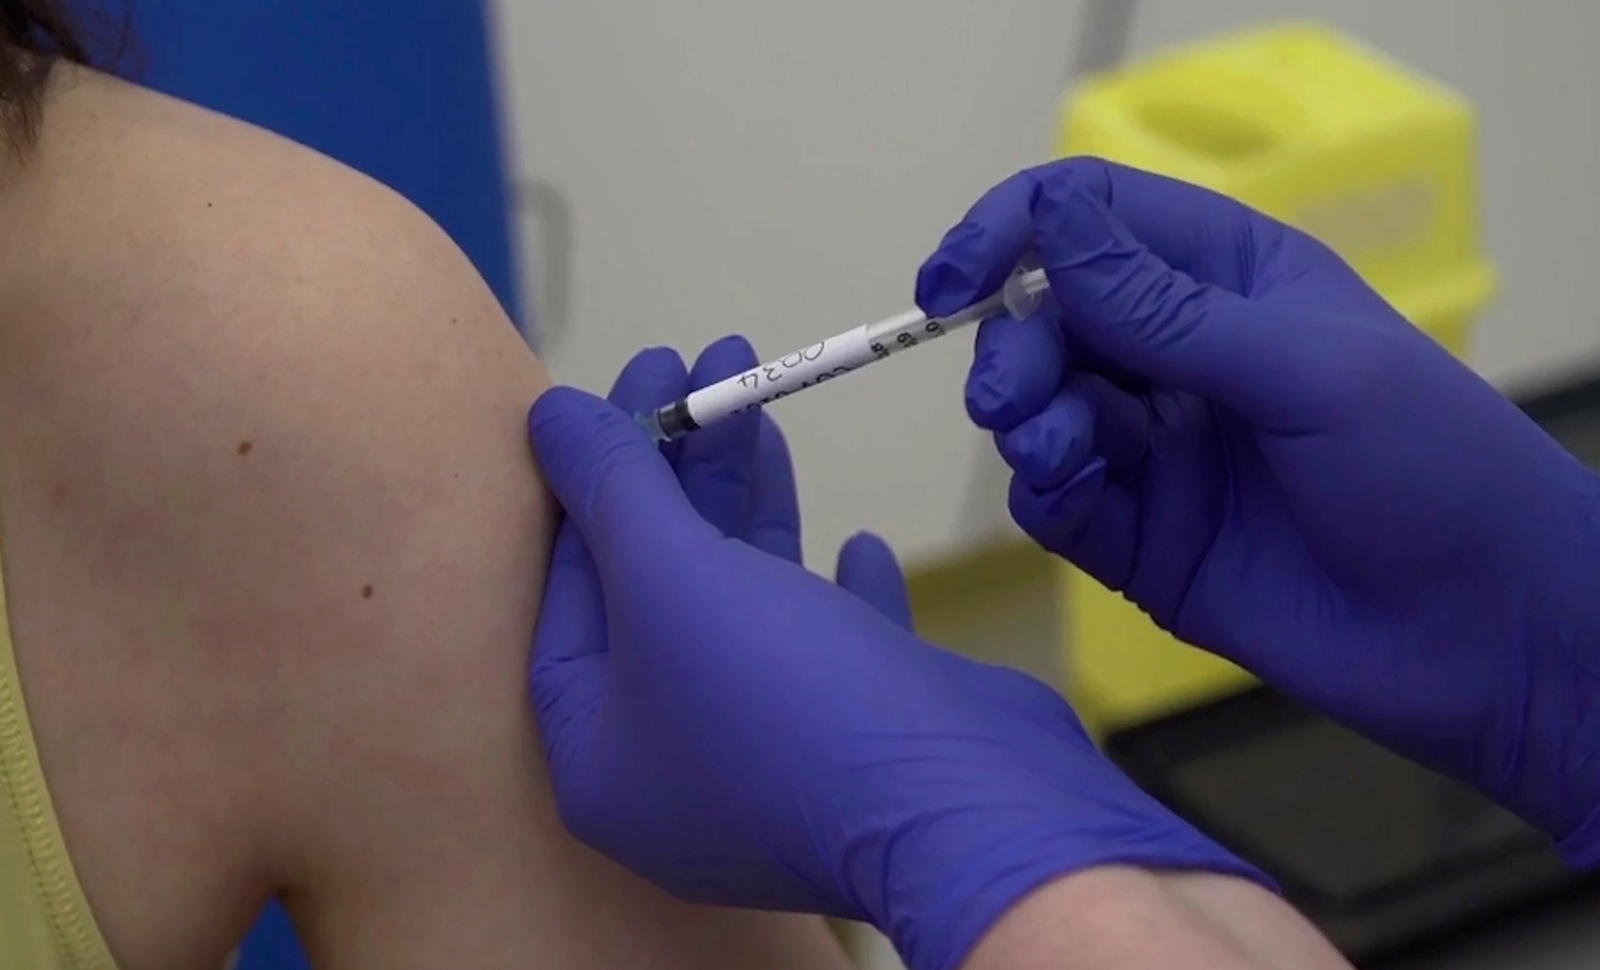 Coronavirus vaccine won't be ready until end of 2021 under "most